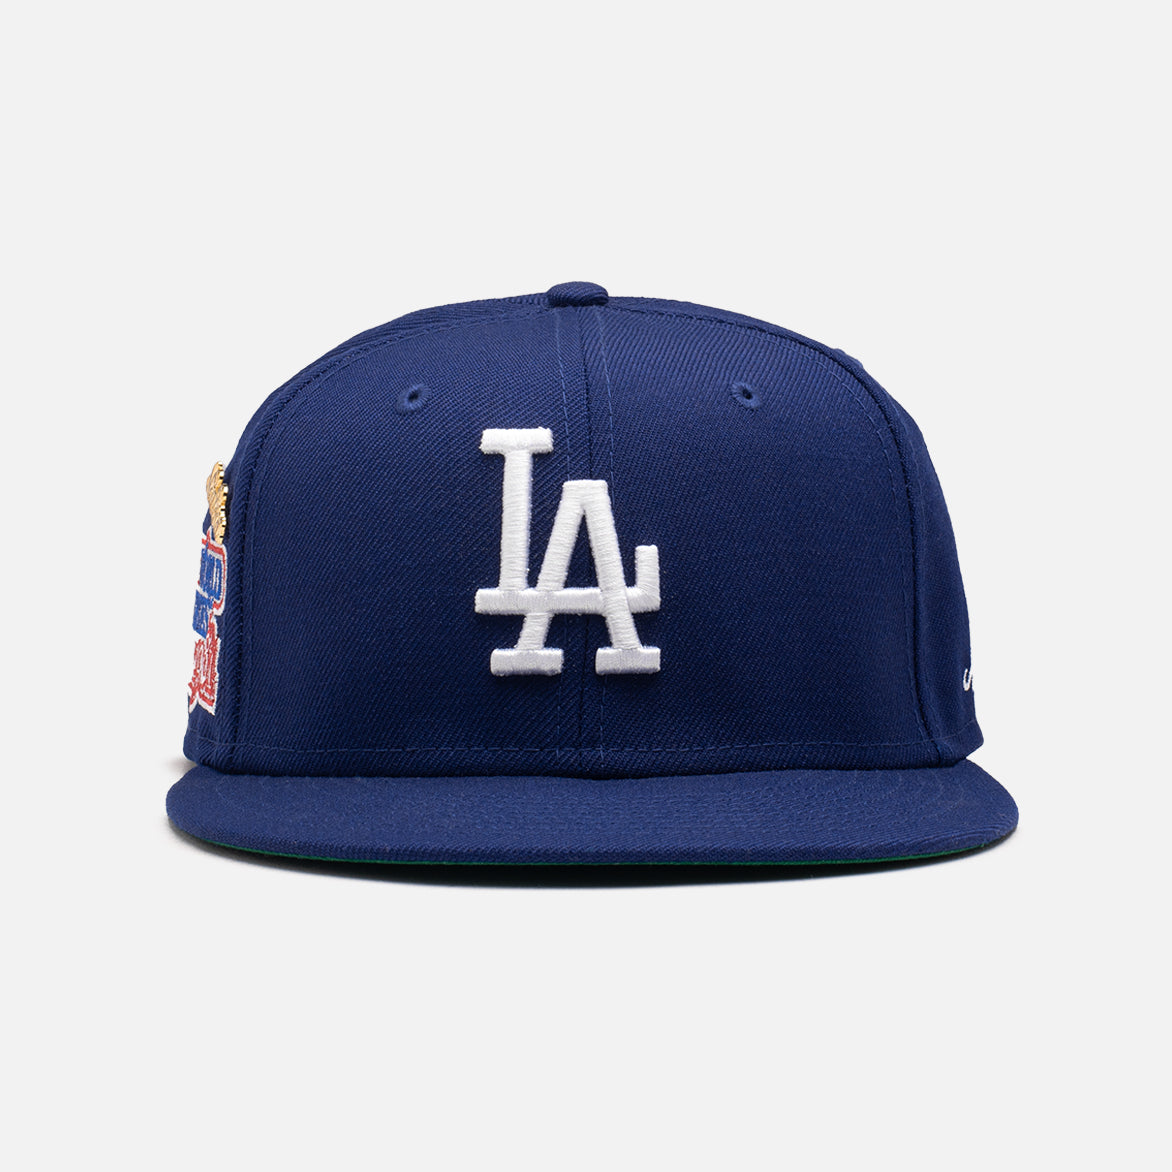 WORLD SERIES COLLECTION 5950 FITTED HAT LA DODGERS '81